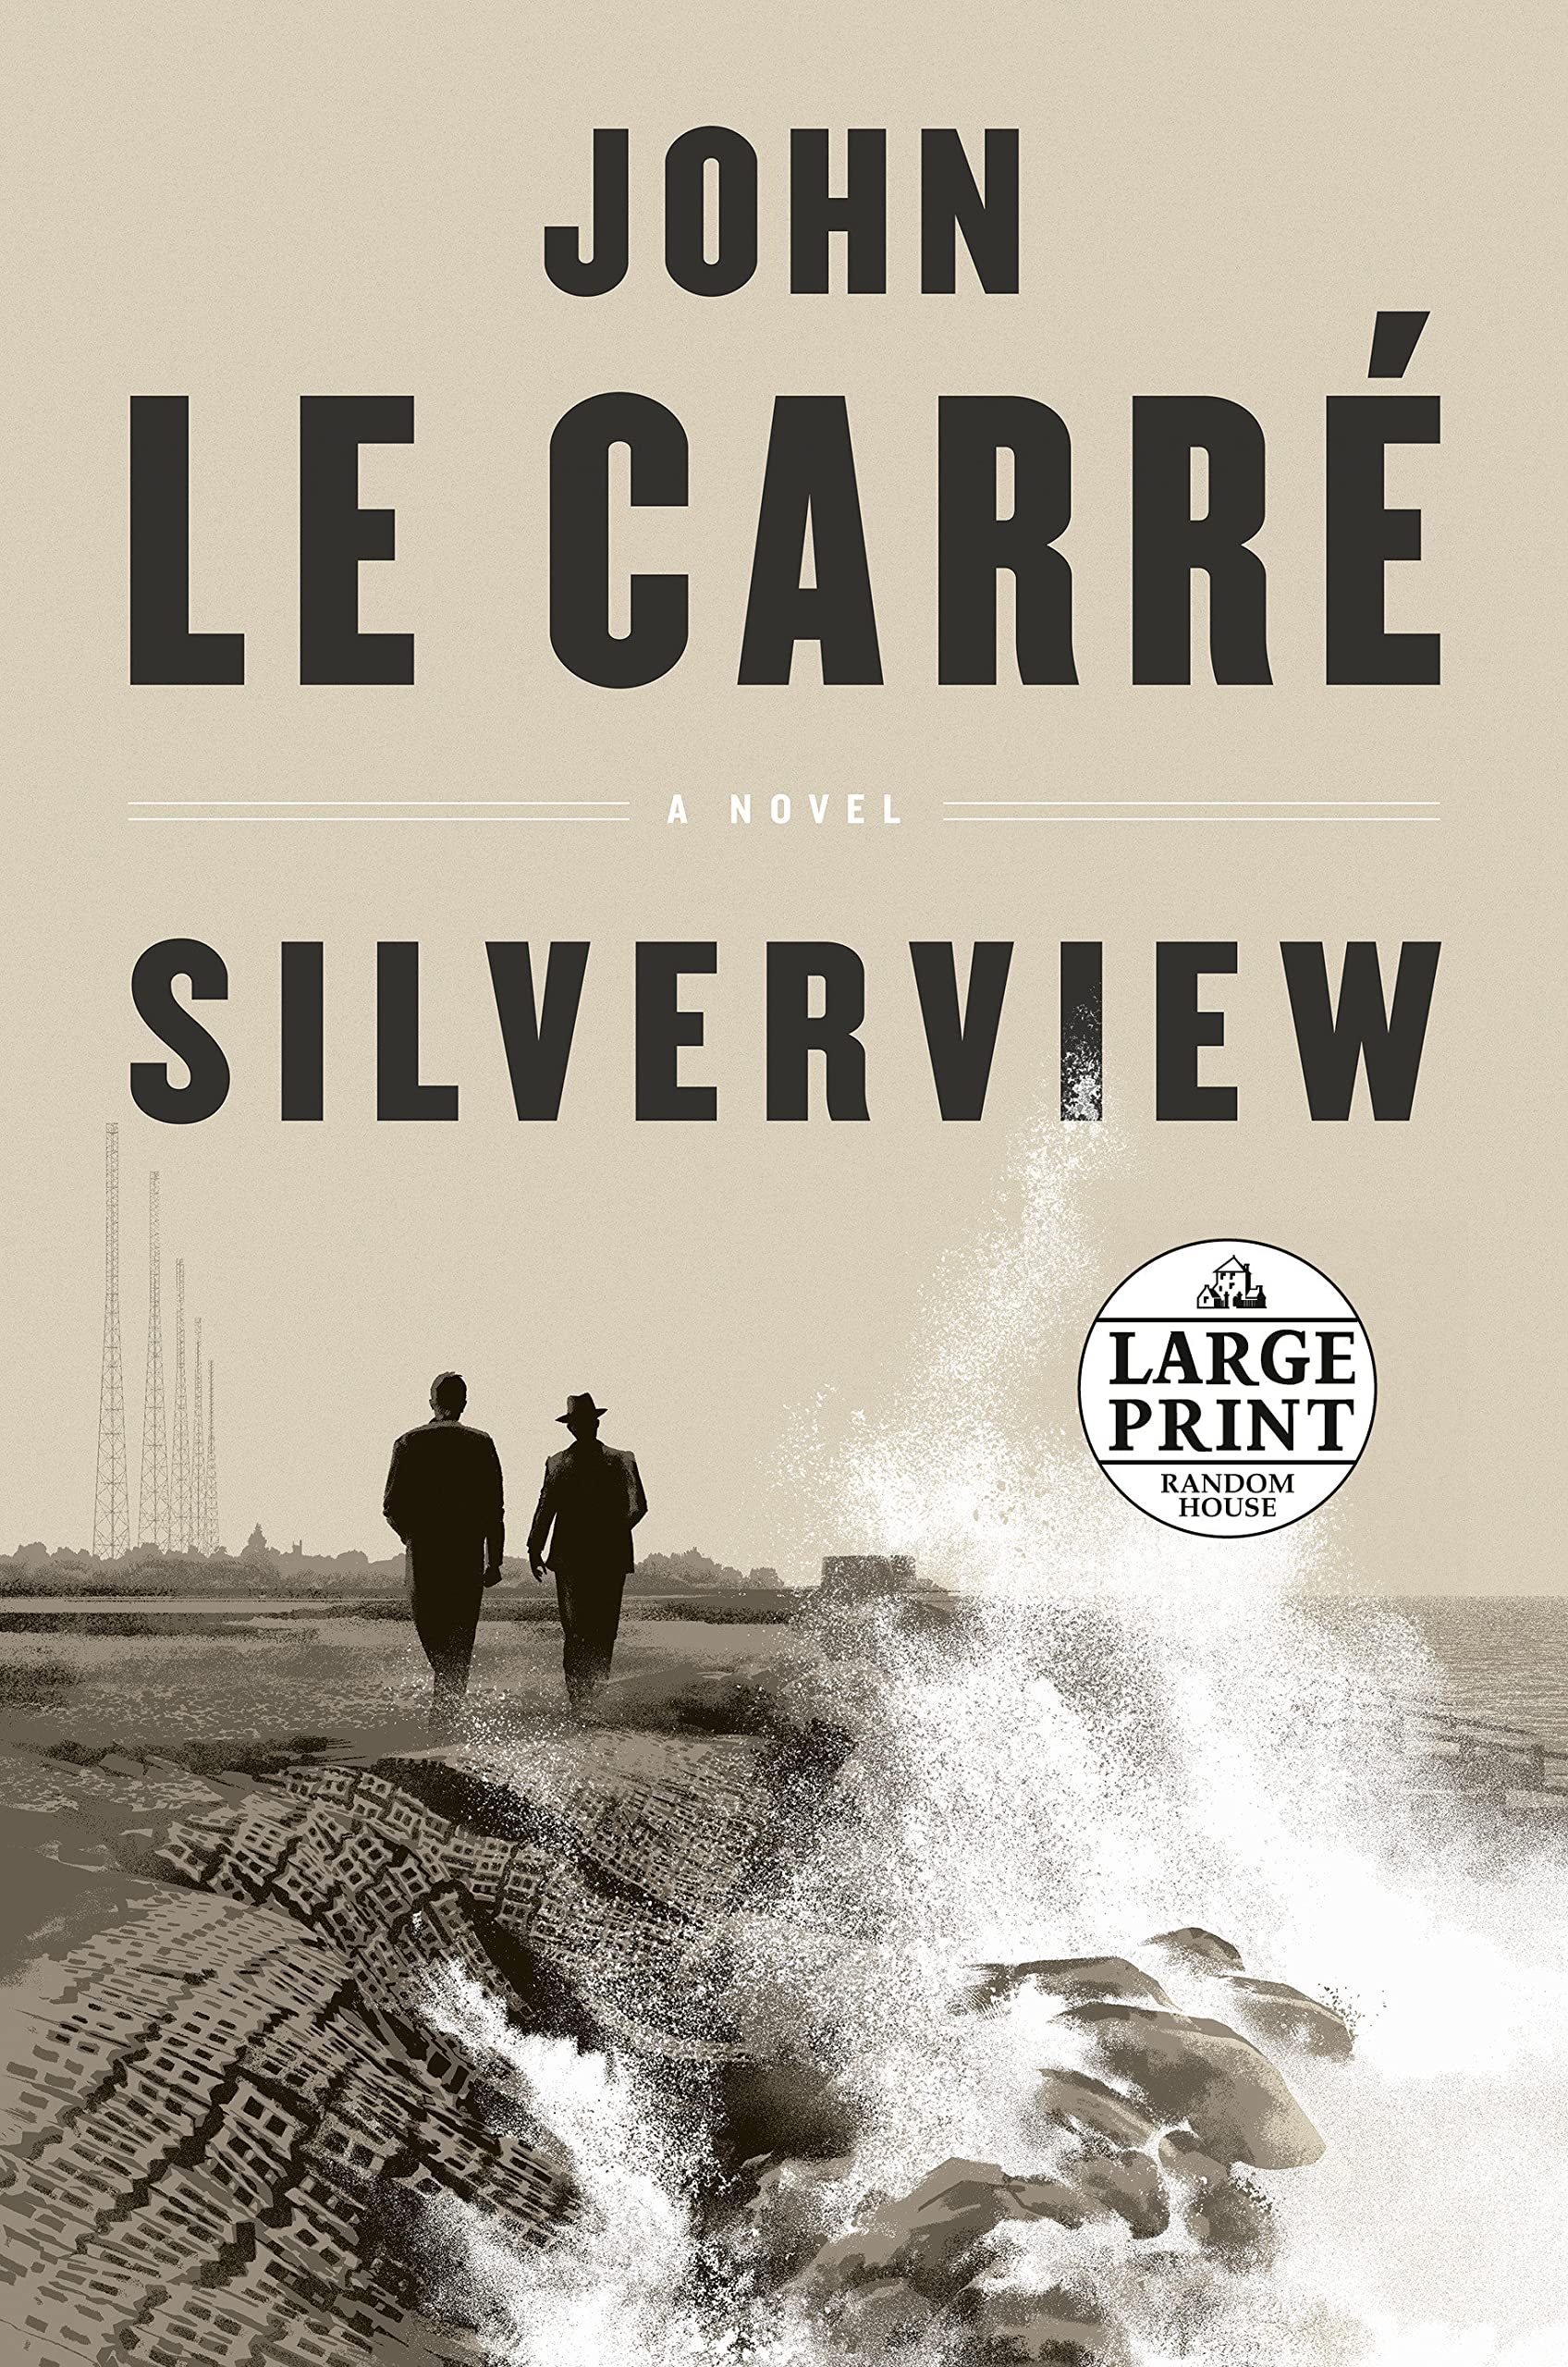 Book Club reads "Silverview"